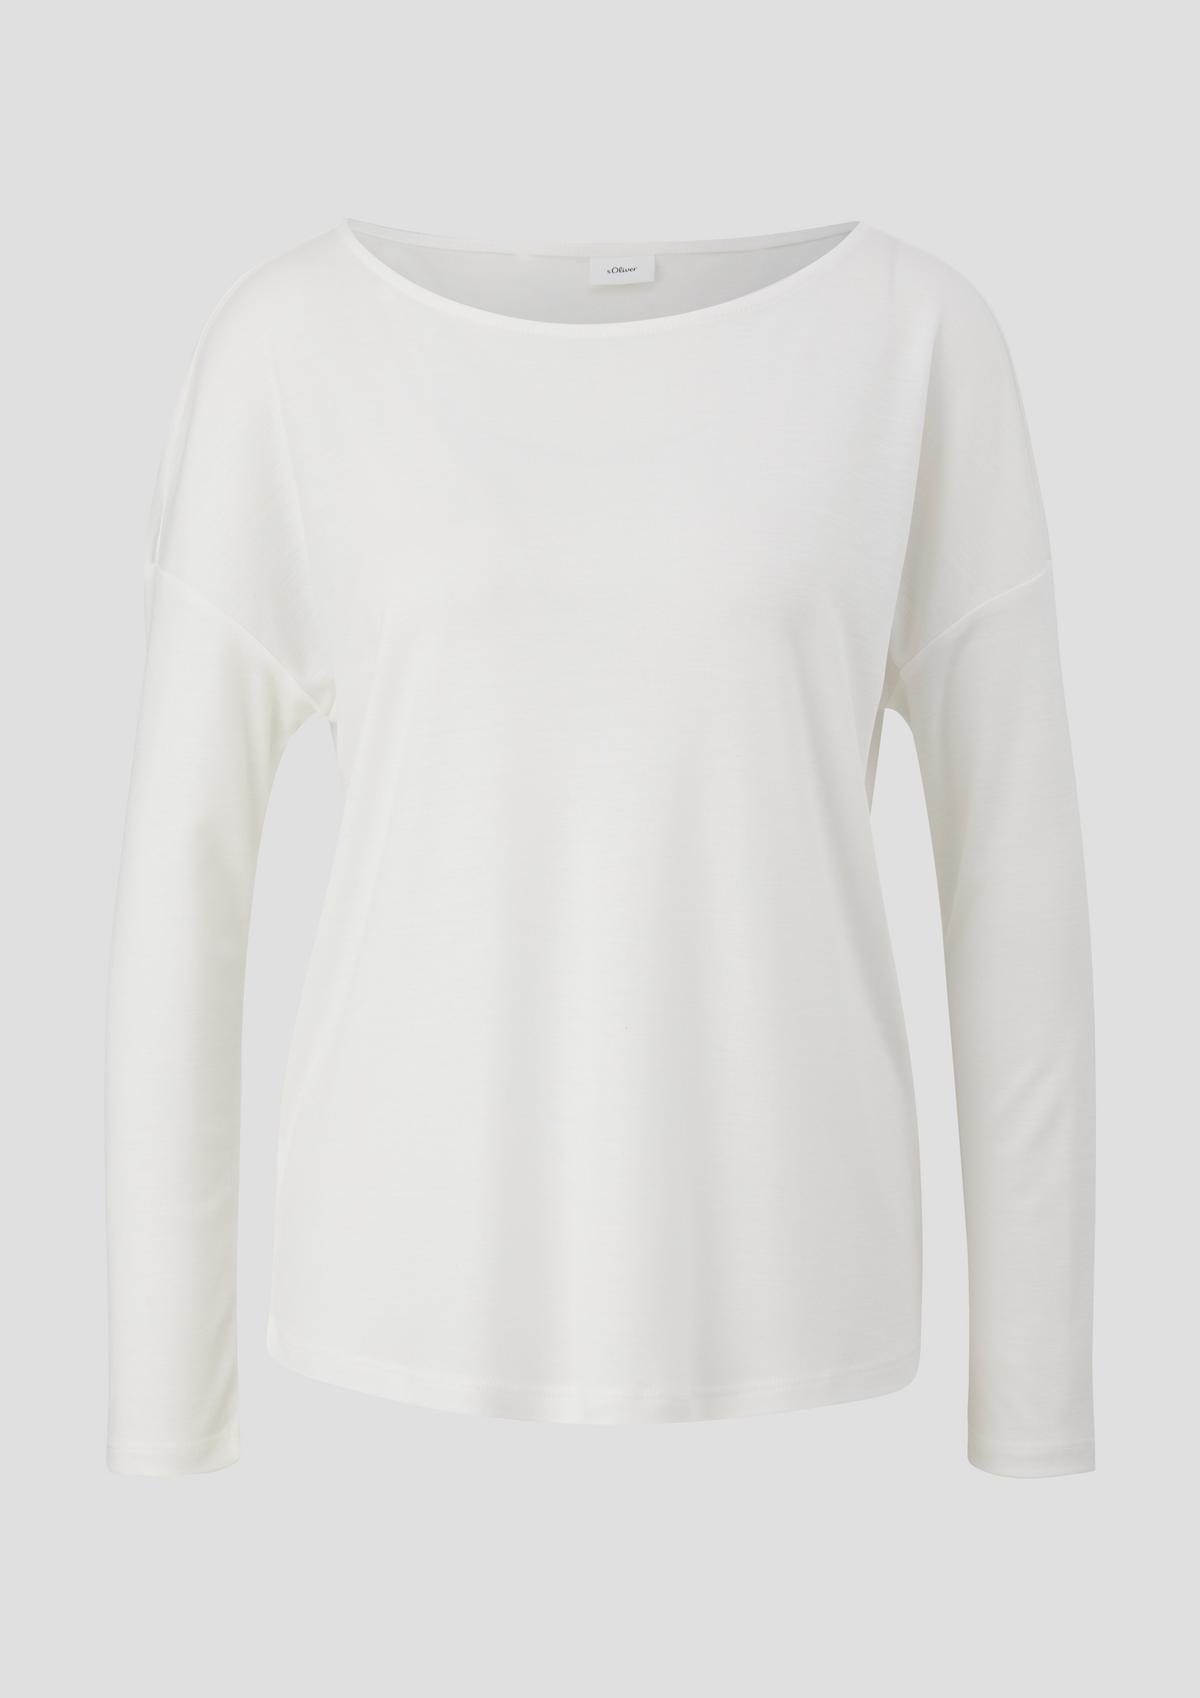 s.Oliver Long sleeve top with dropped shoulders